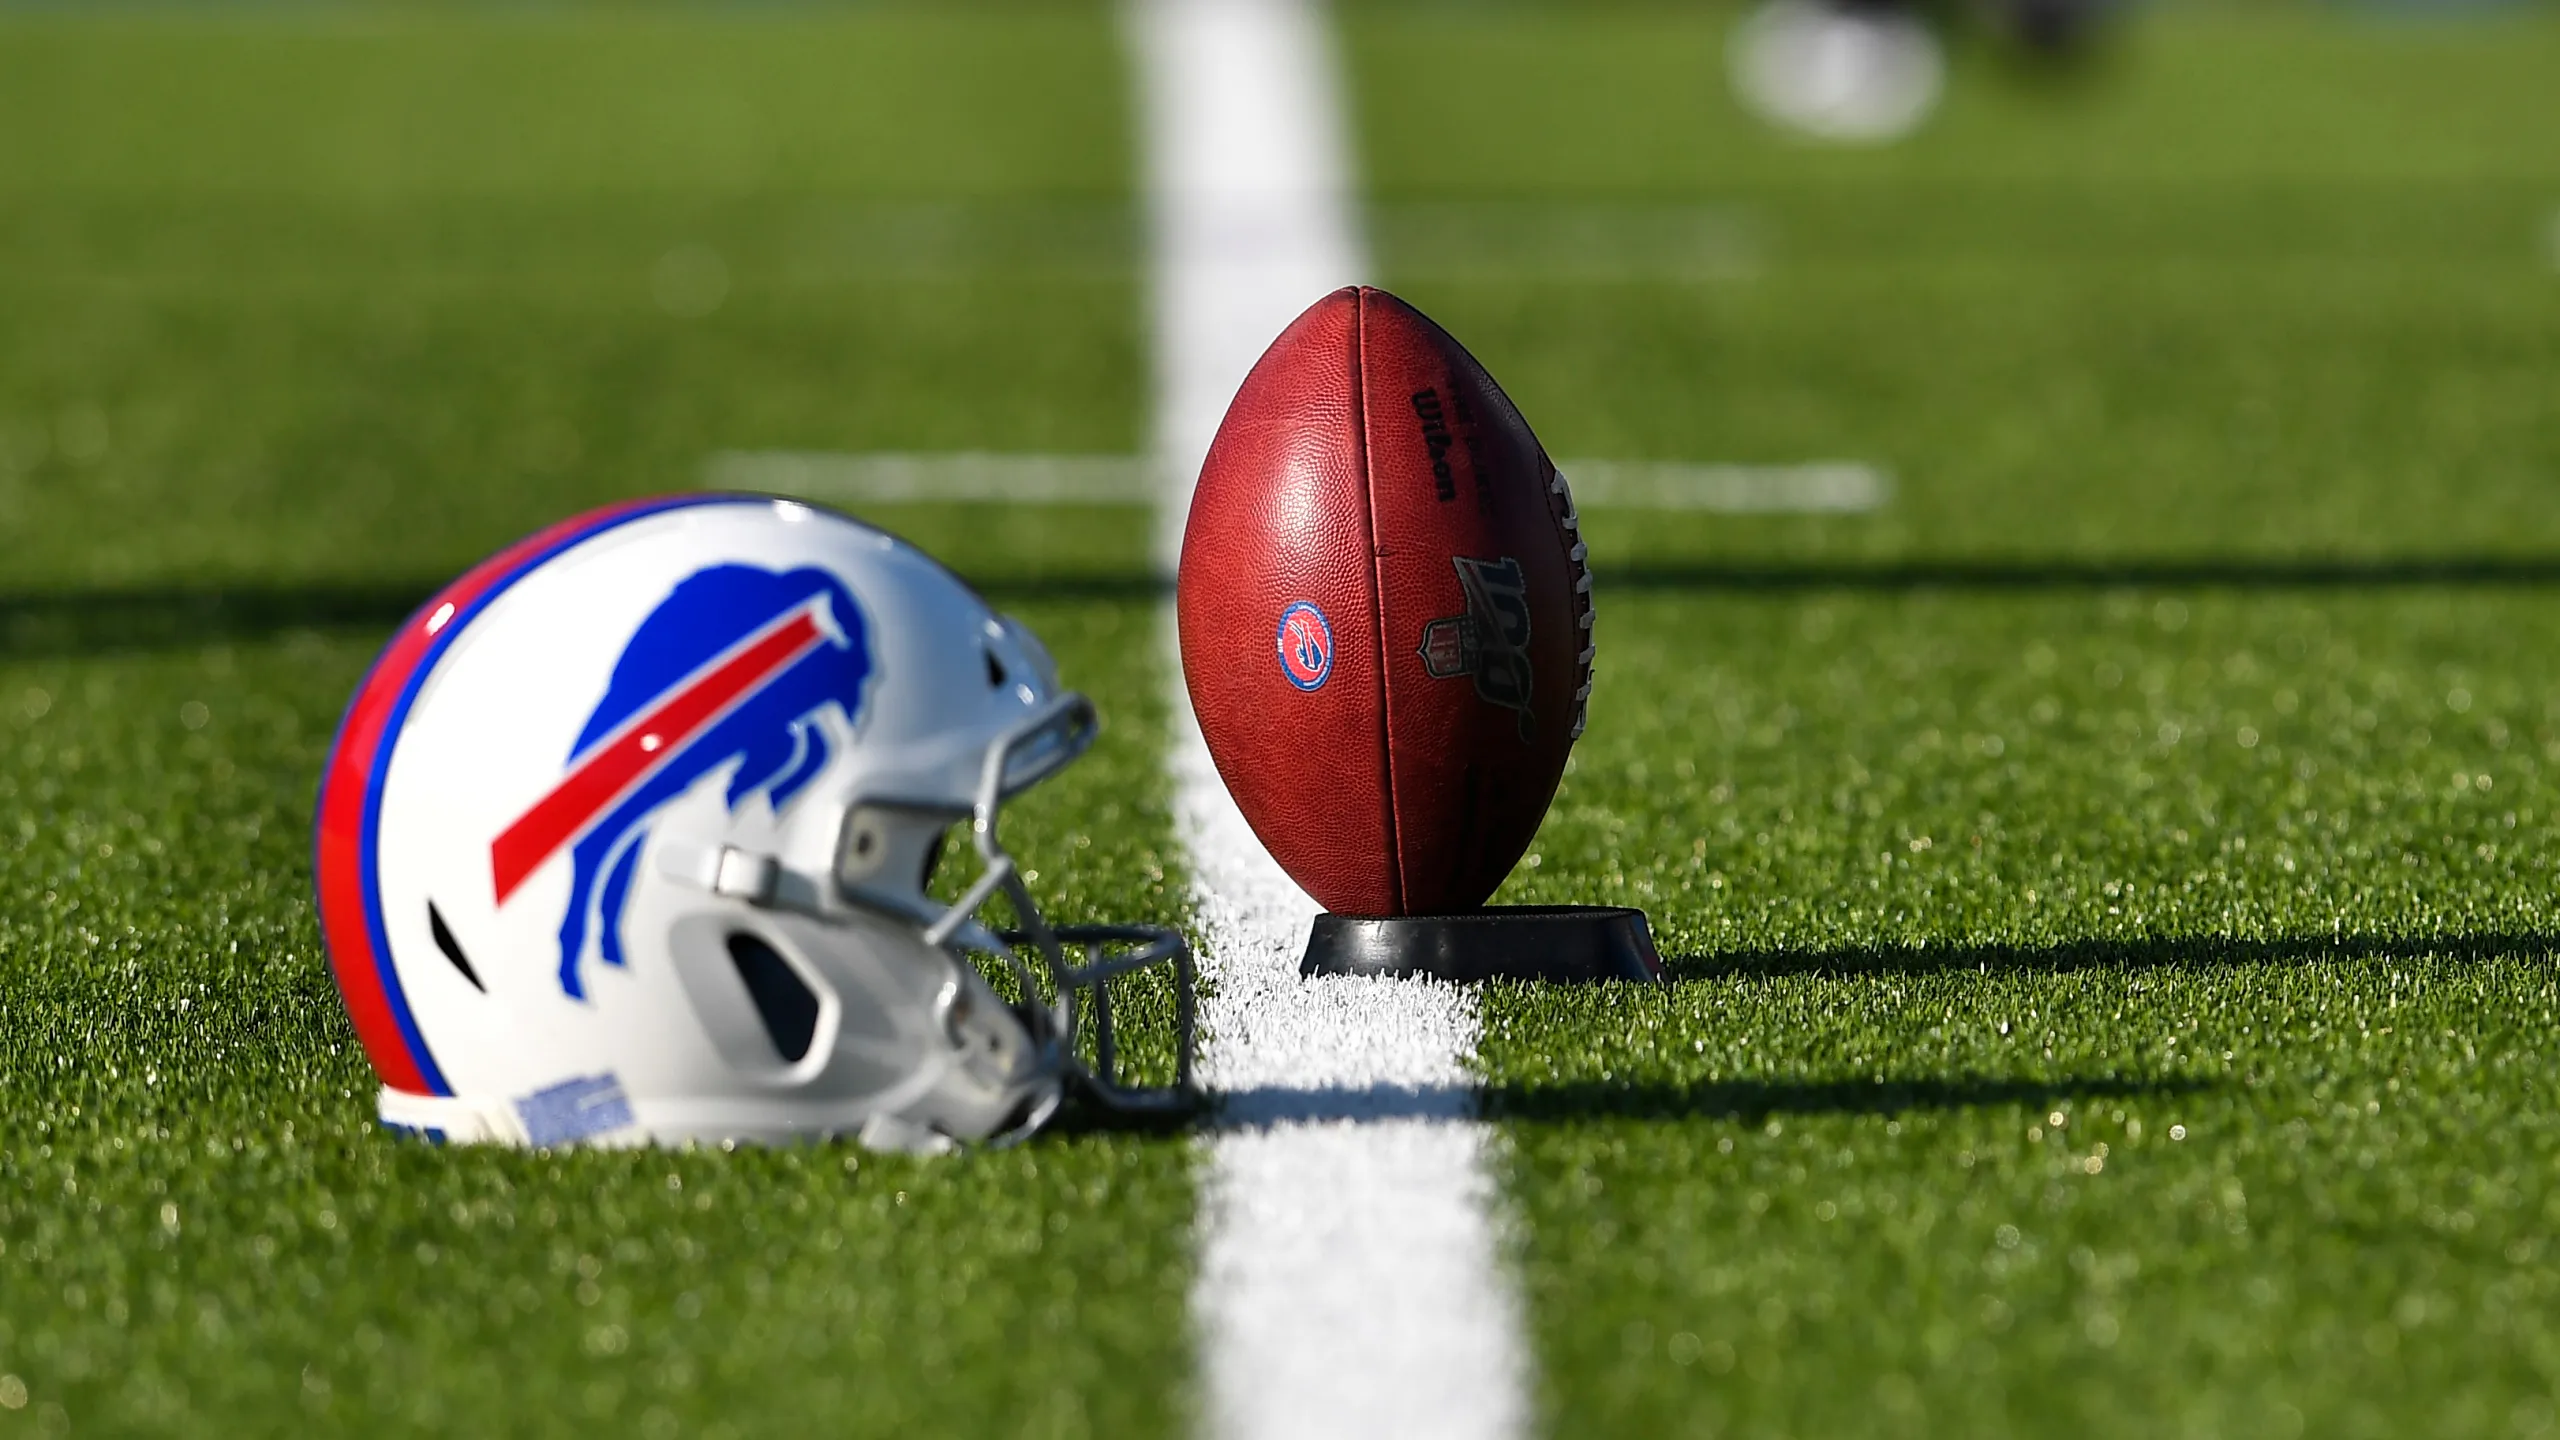 Breaking News: Buffalo Bills Just Signed another $12.4 million contract…